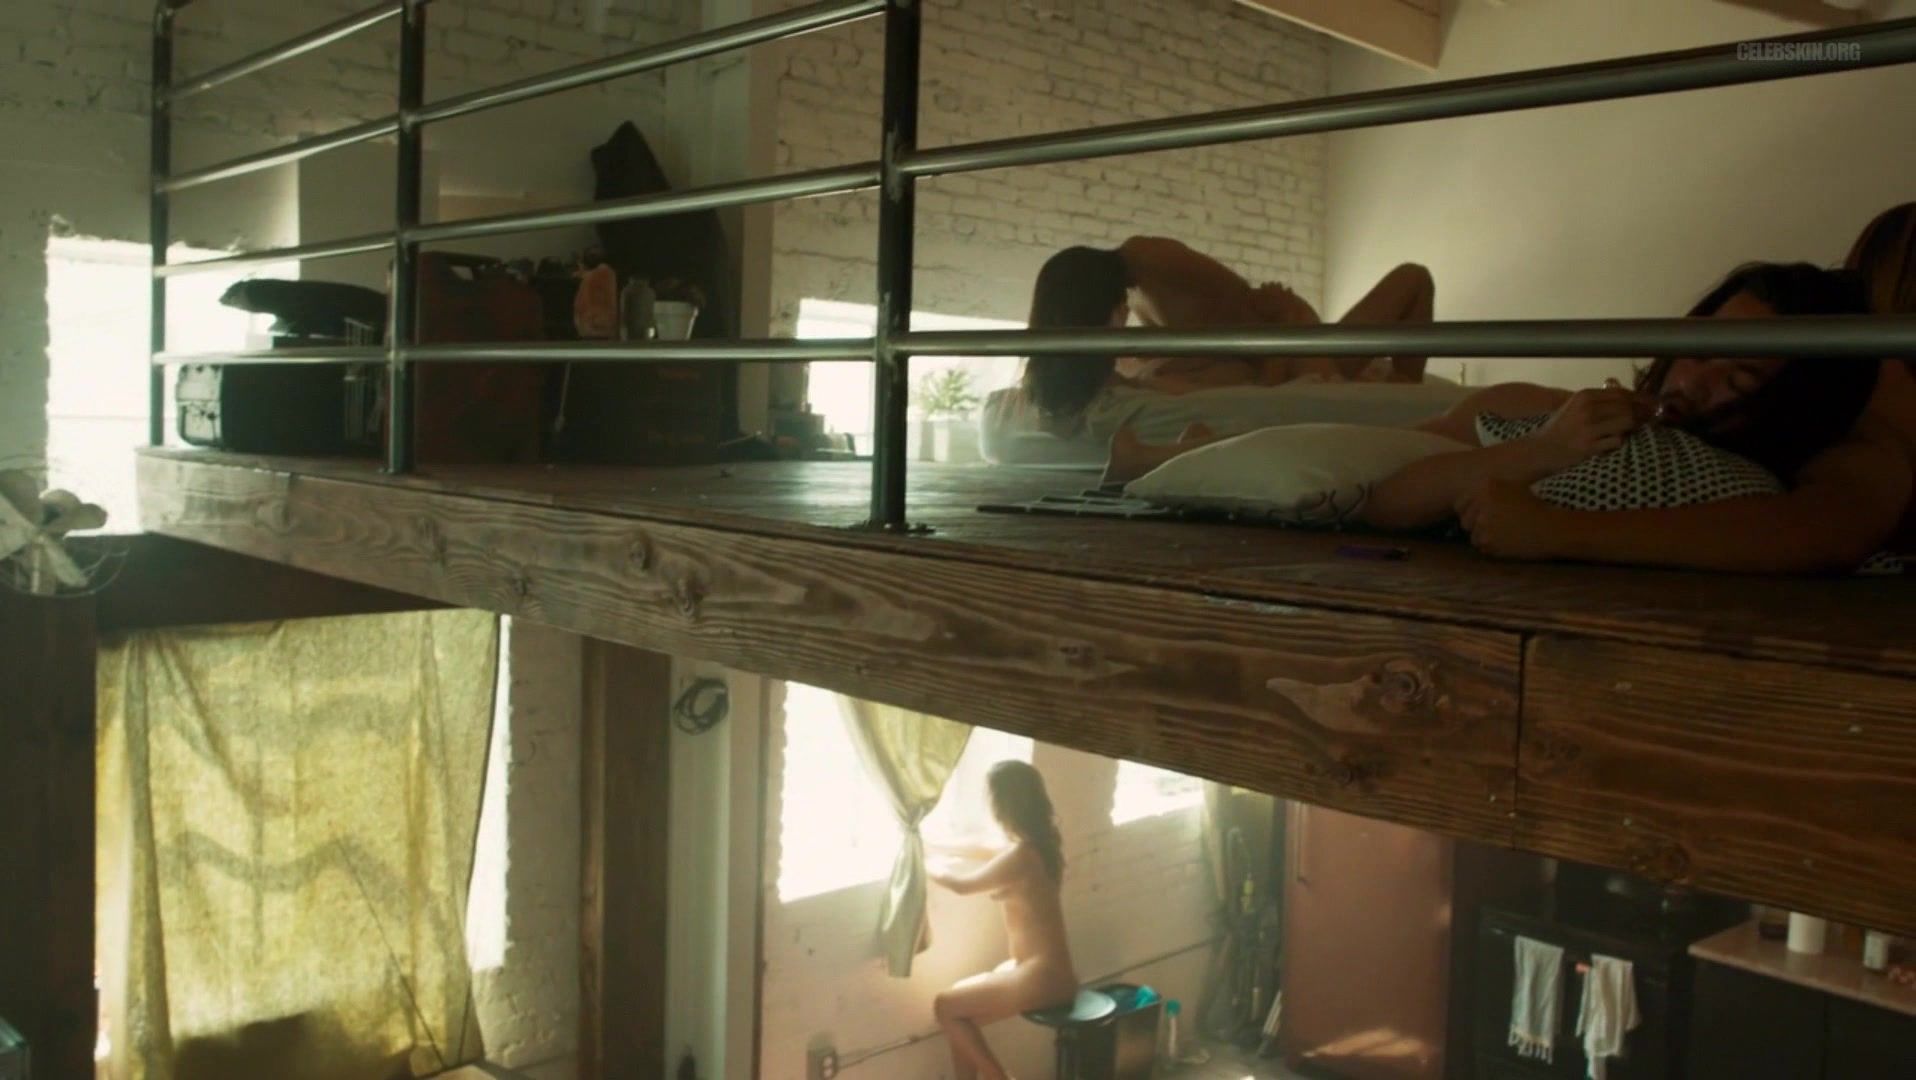 Butt Plug Julia Kelly, Karina Fontes, Madeline Brewer - The Deleted s01e02 (2016) Cei - 2